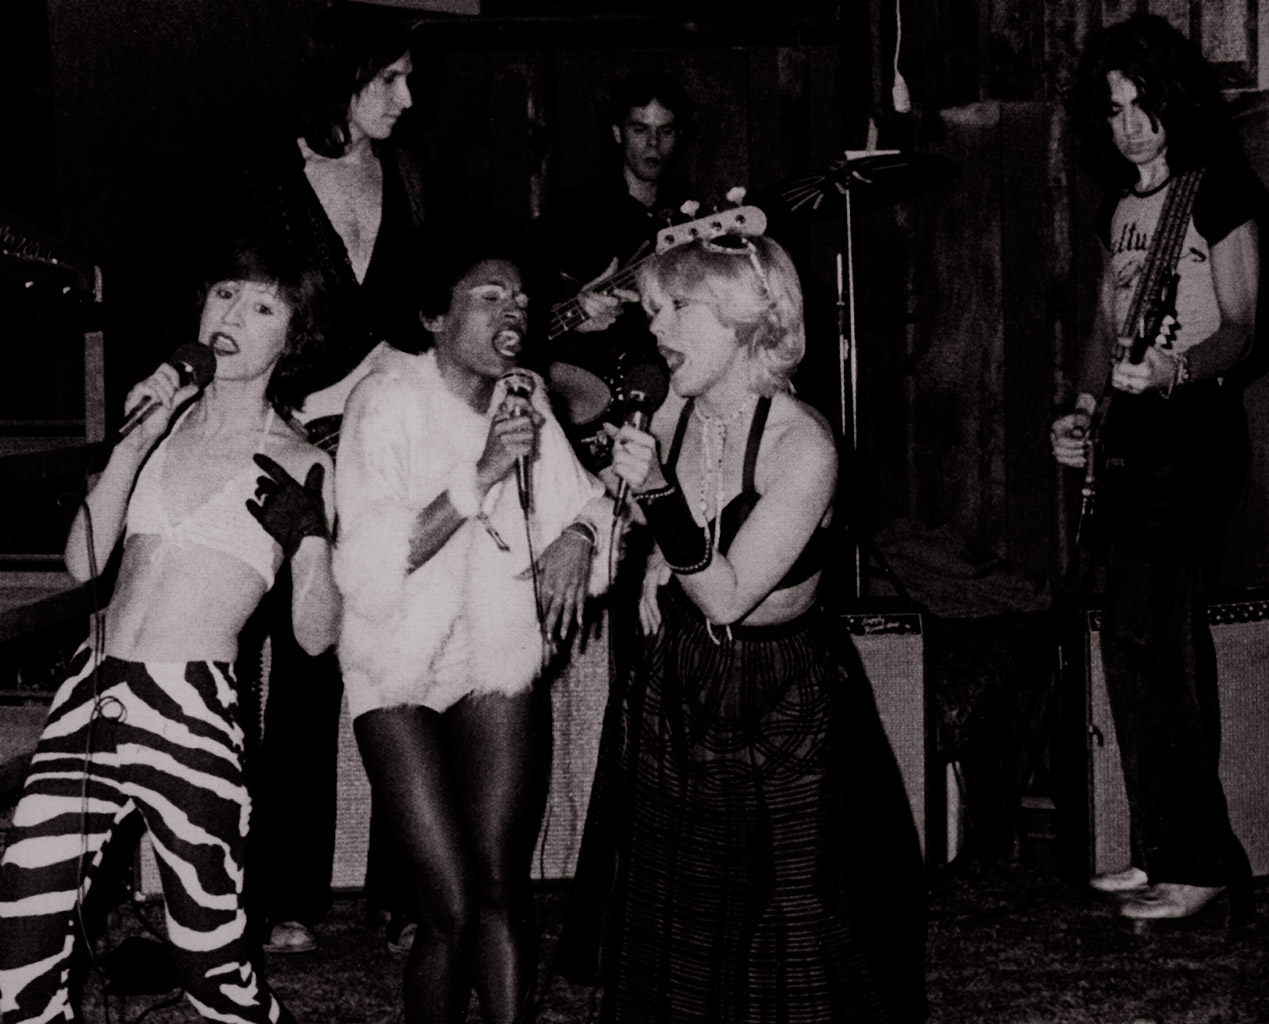 CBGB on June 24 1974. Later the same night